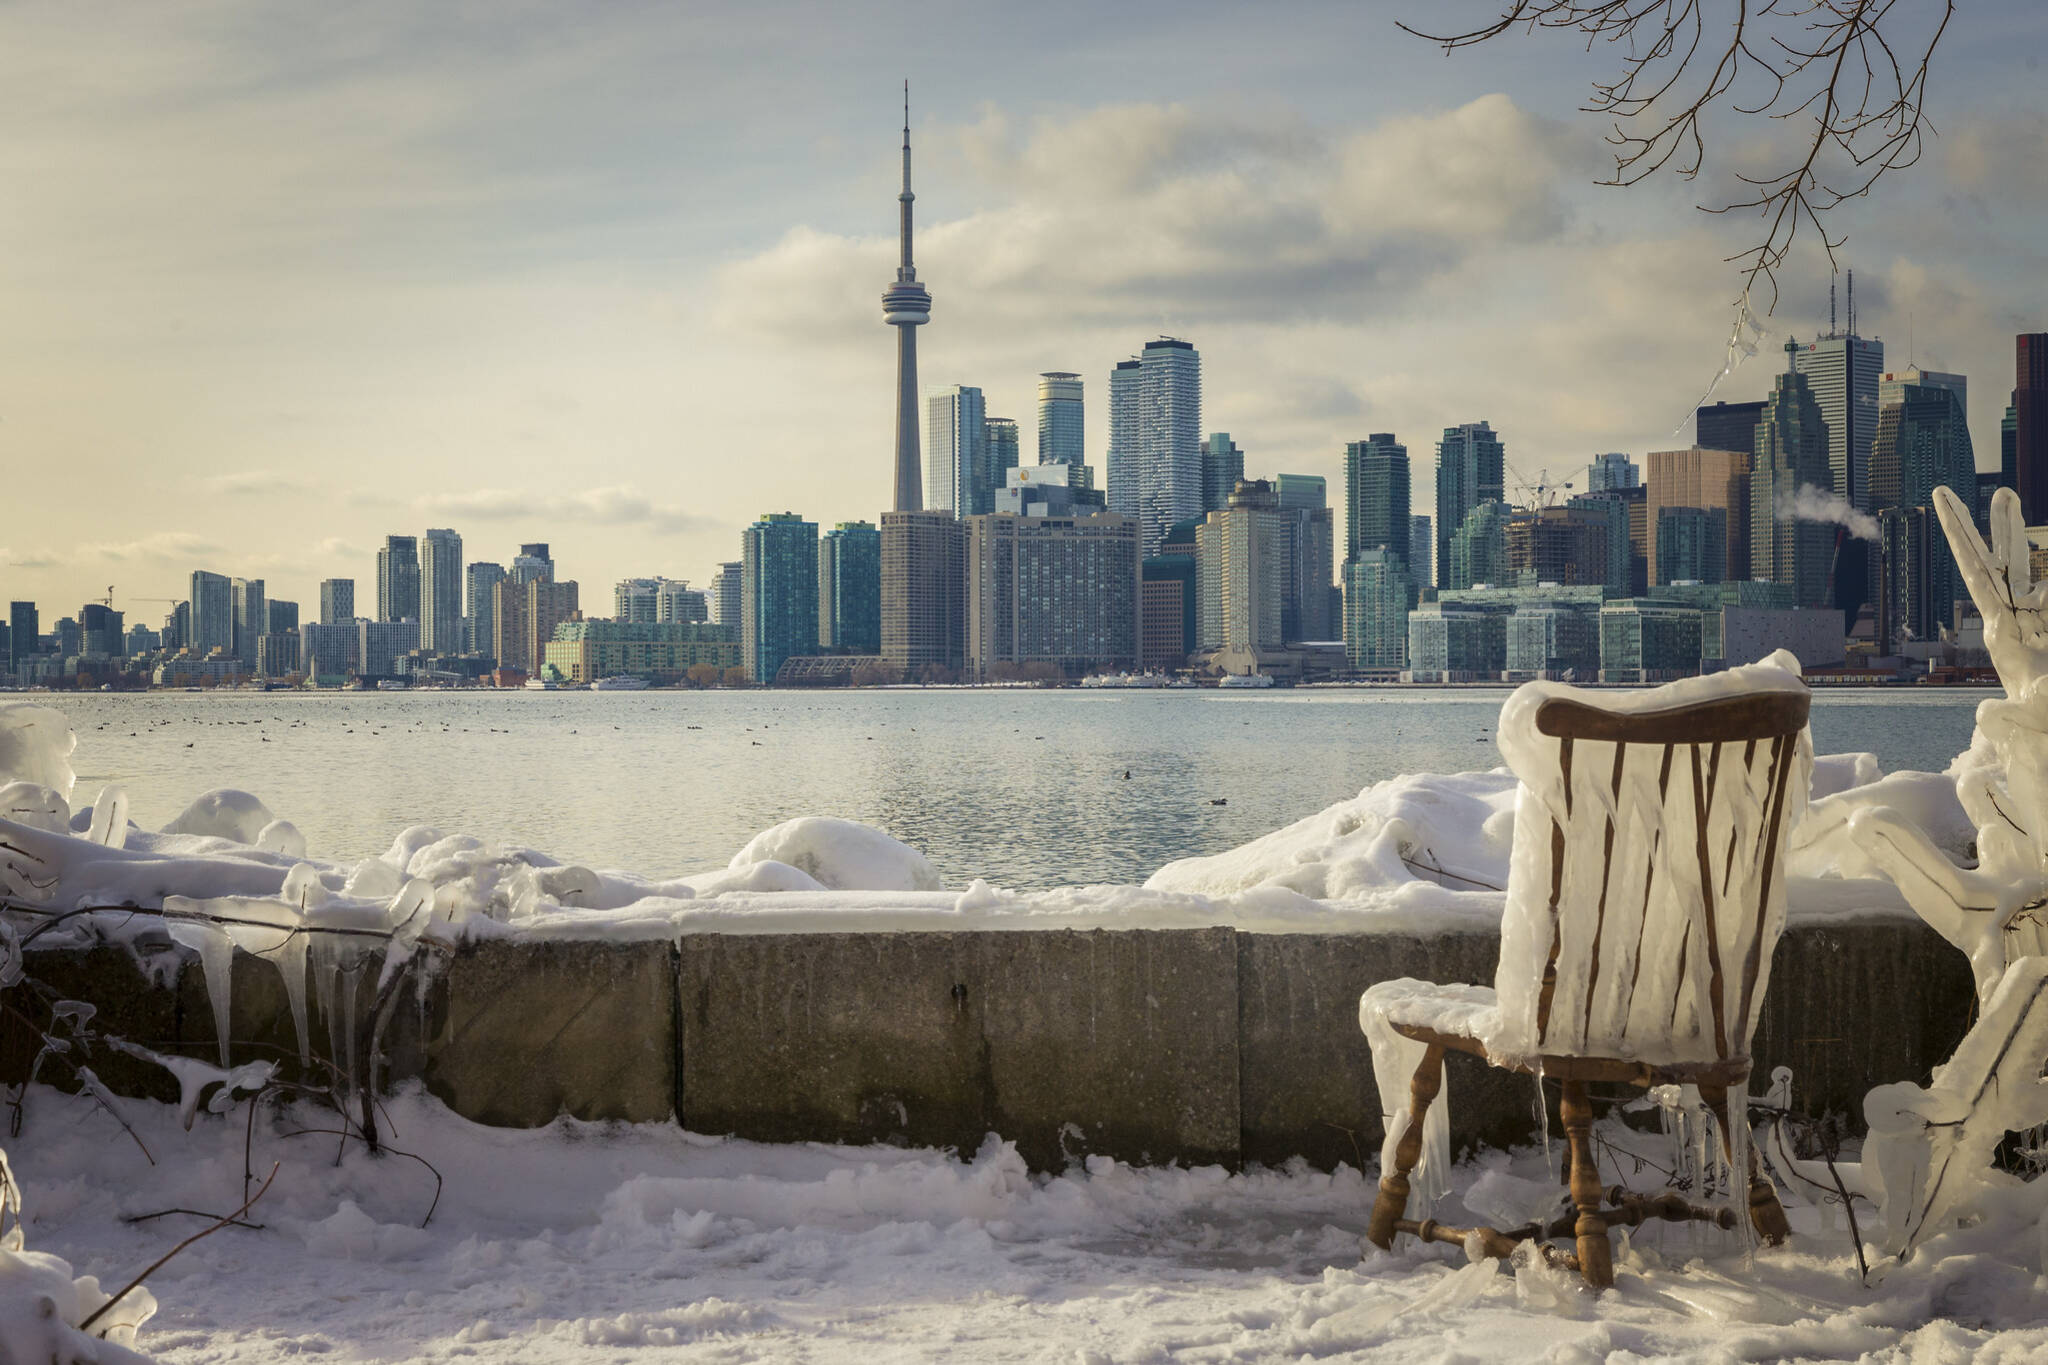 Toronto is about to get hammered with snow as temperatures plummet